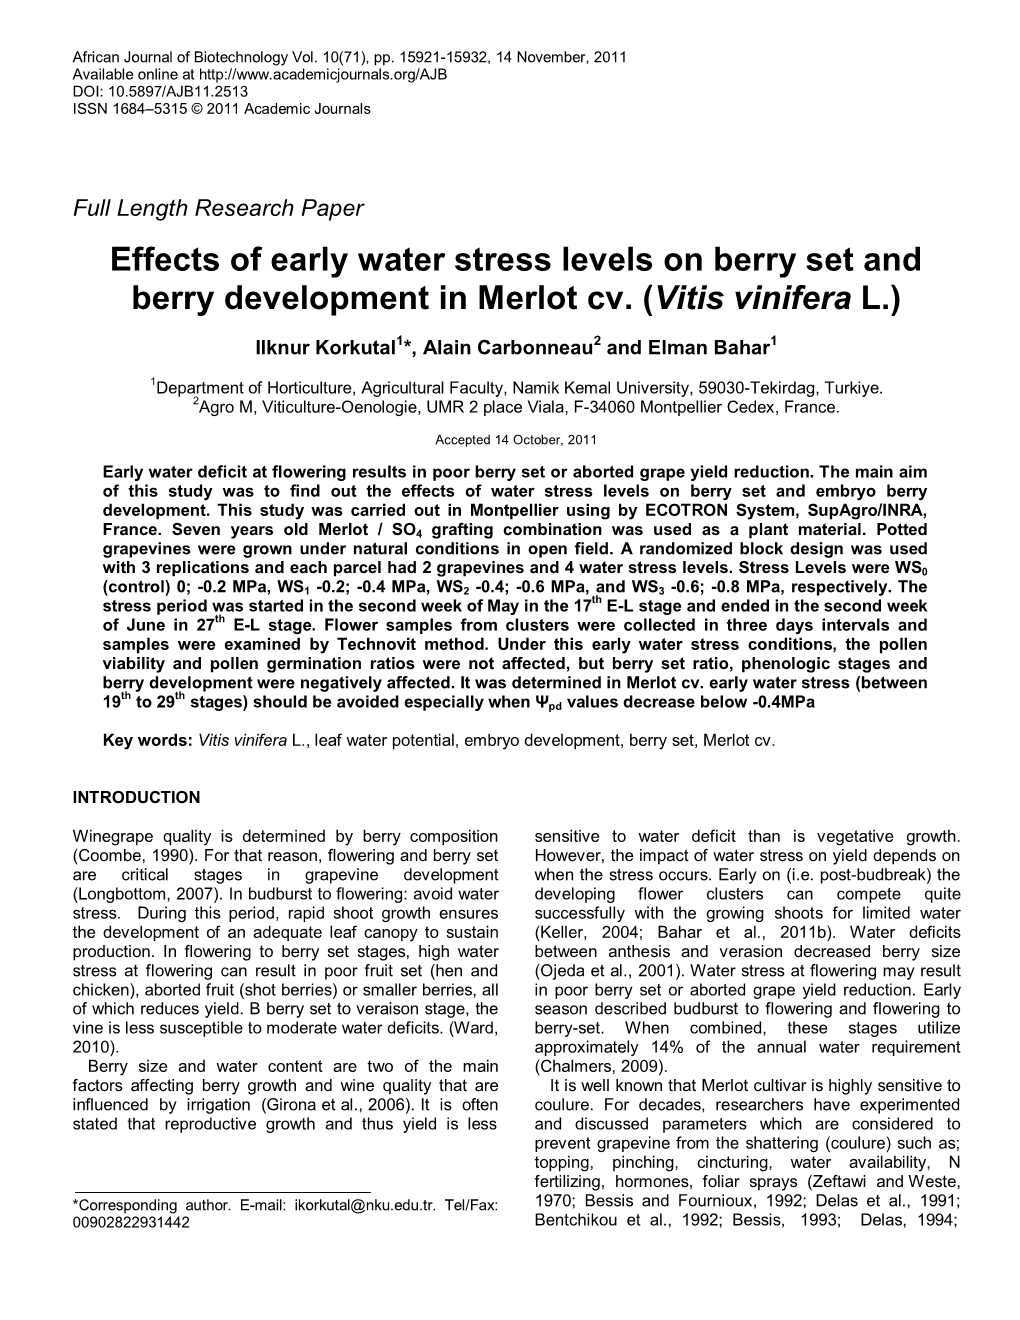 Effects of Early Water Stress Levels on Berry Set and Berry Development in Merlot Cv